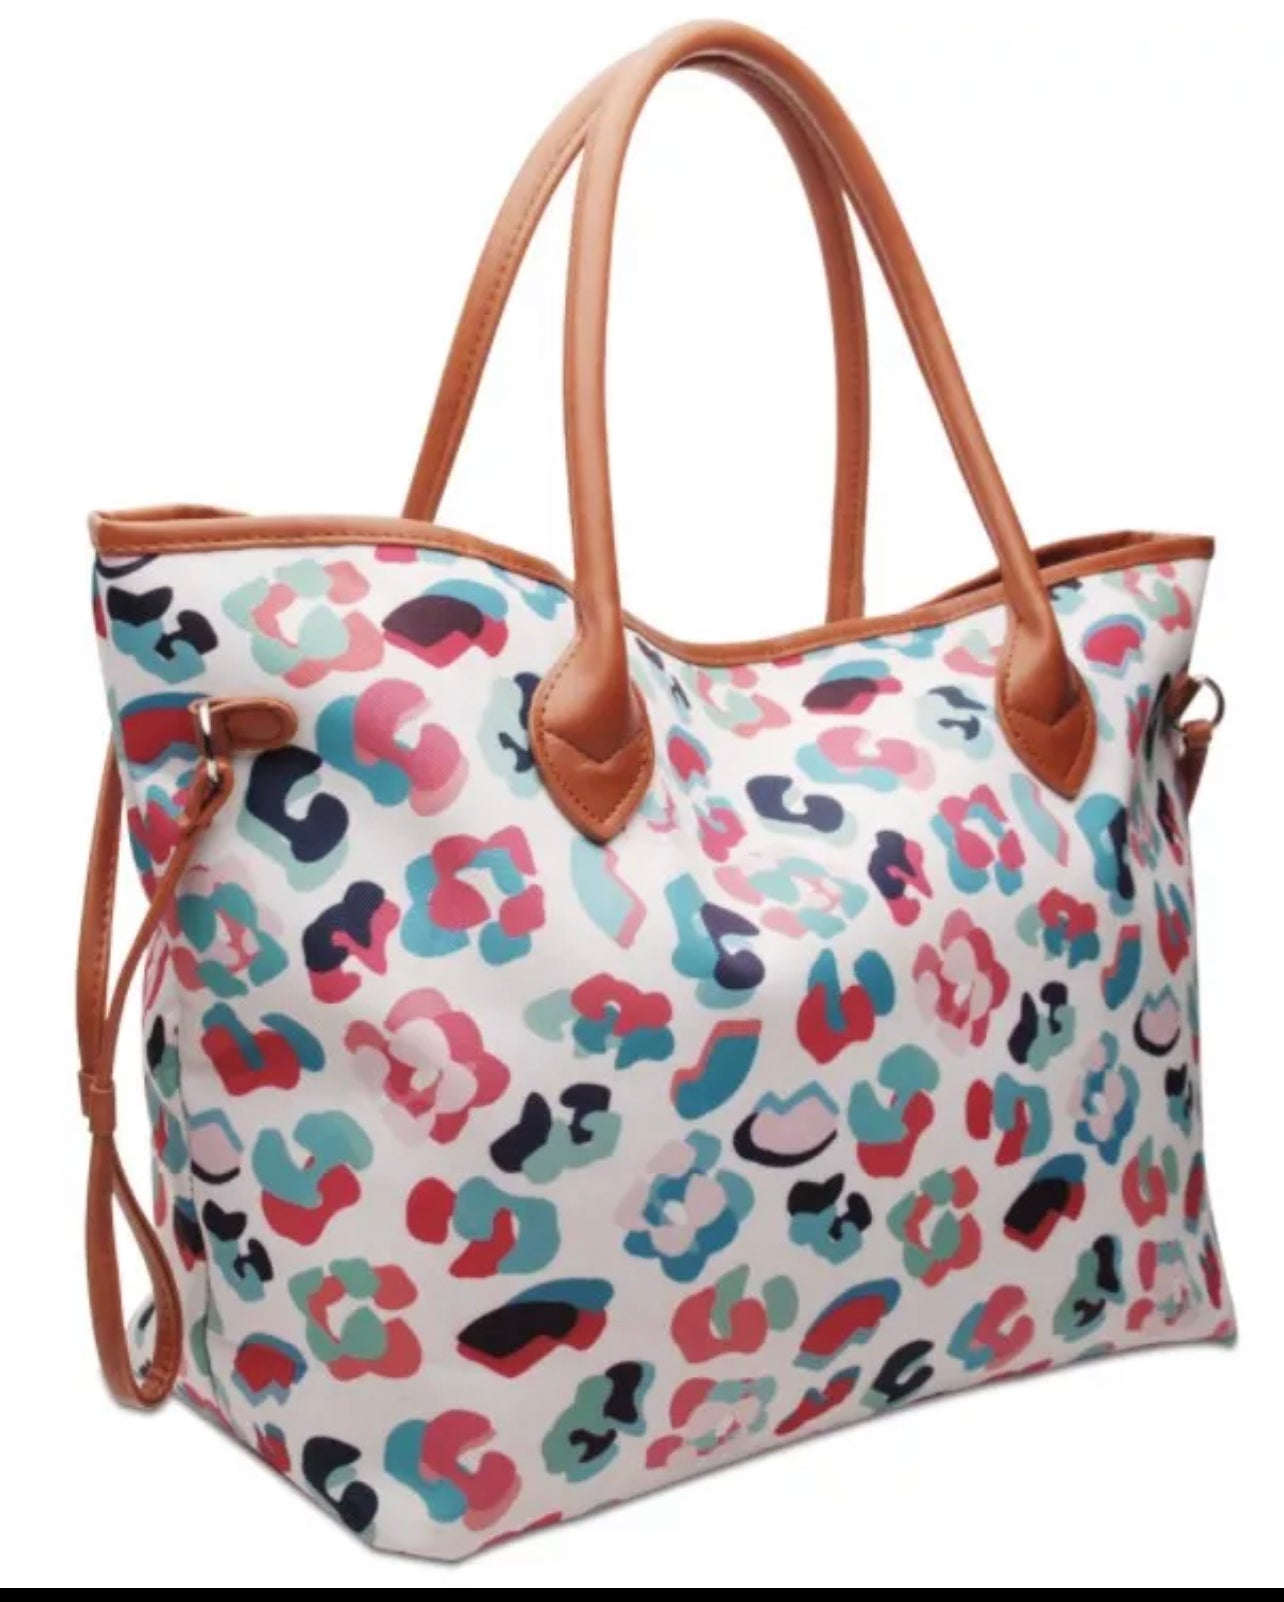 The Spotted Tori Tote